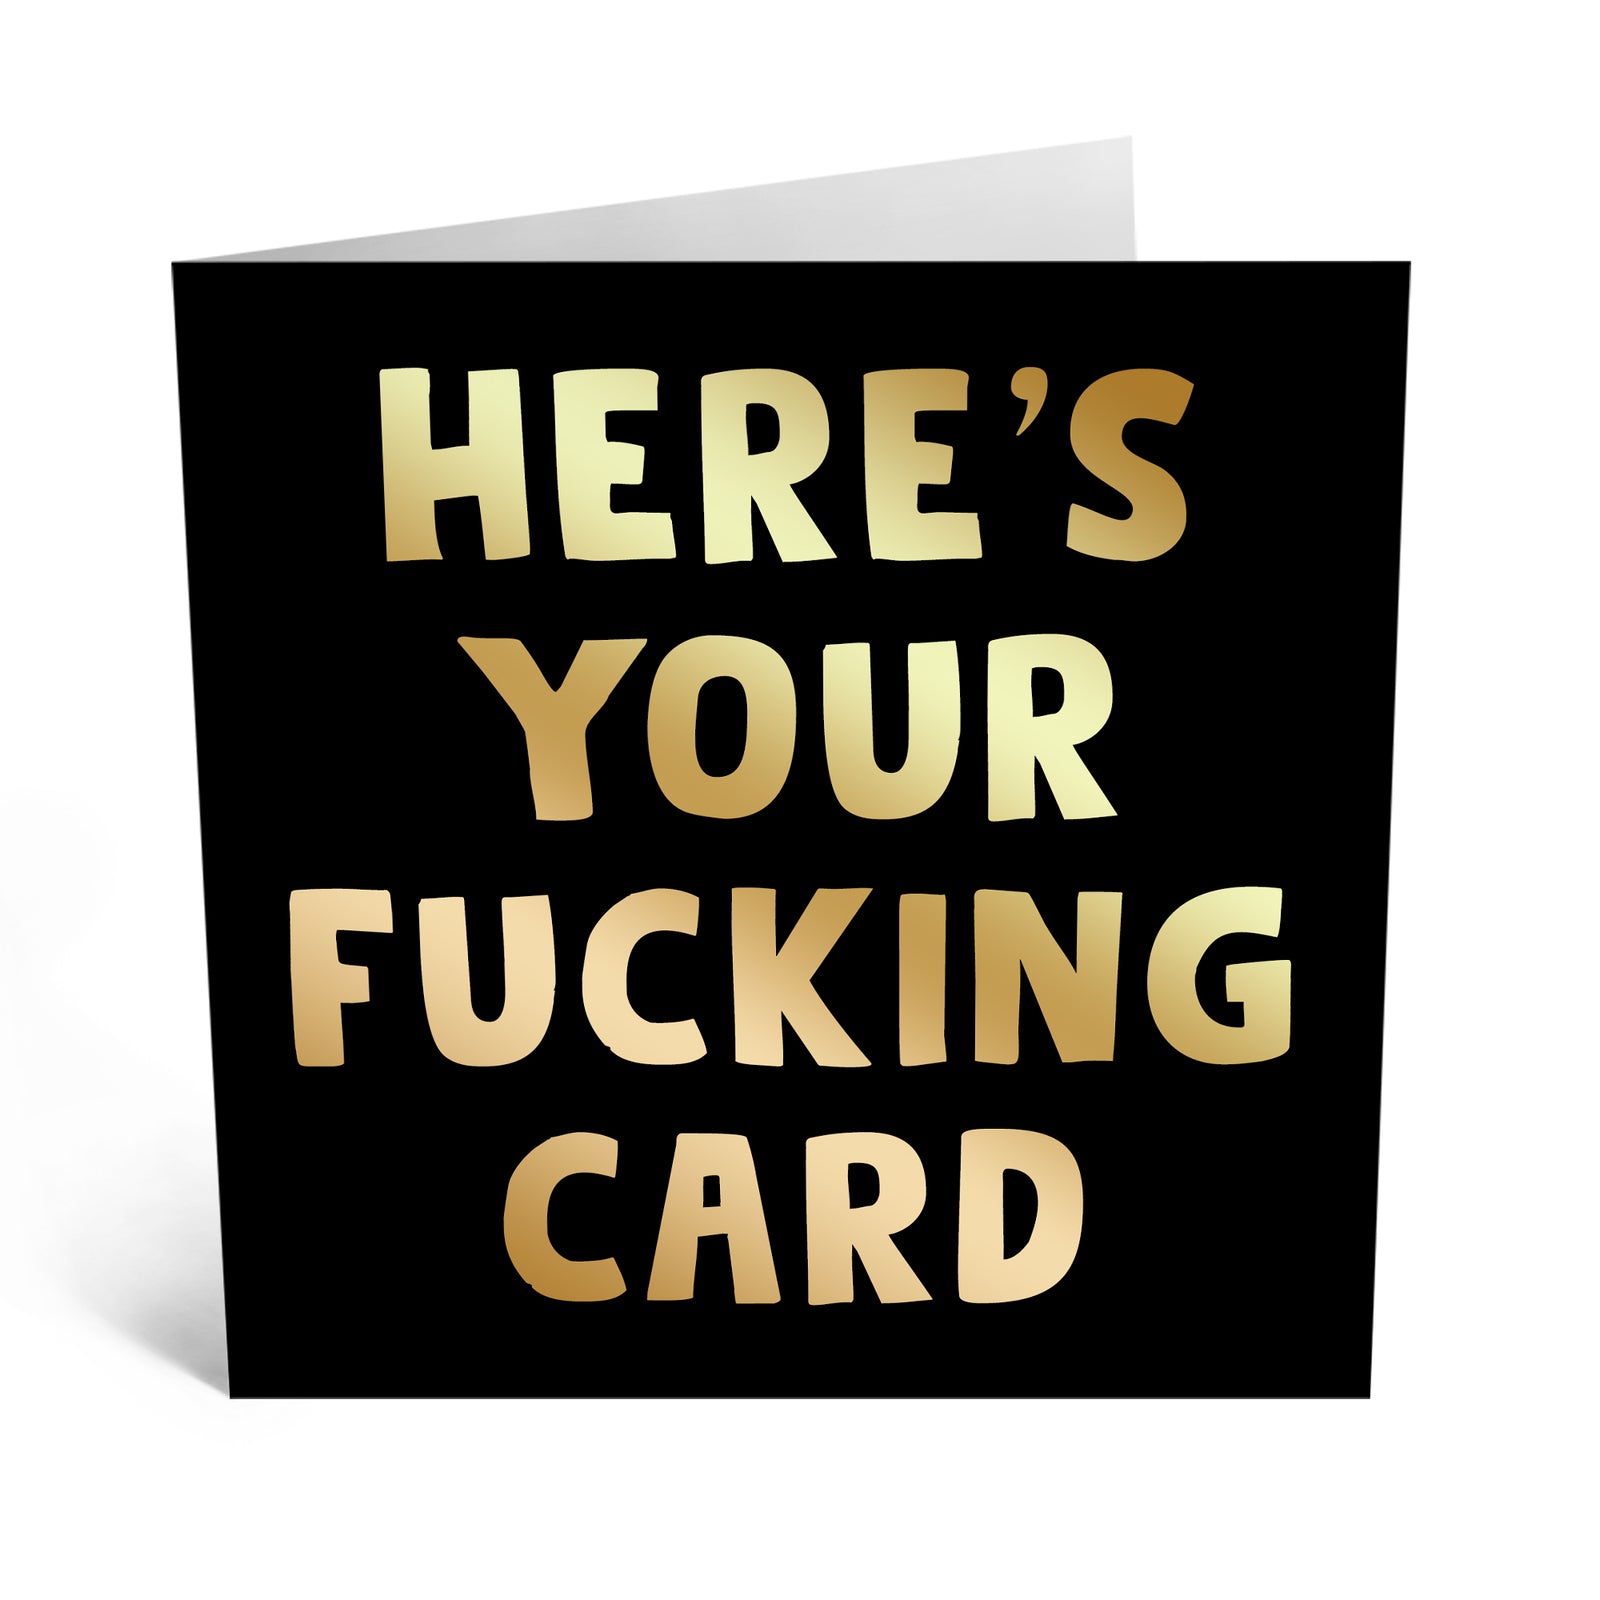 Here's Your Fucking Birthday Card